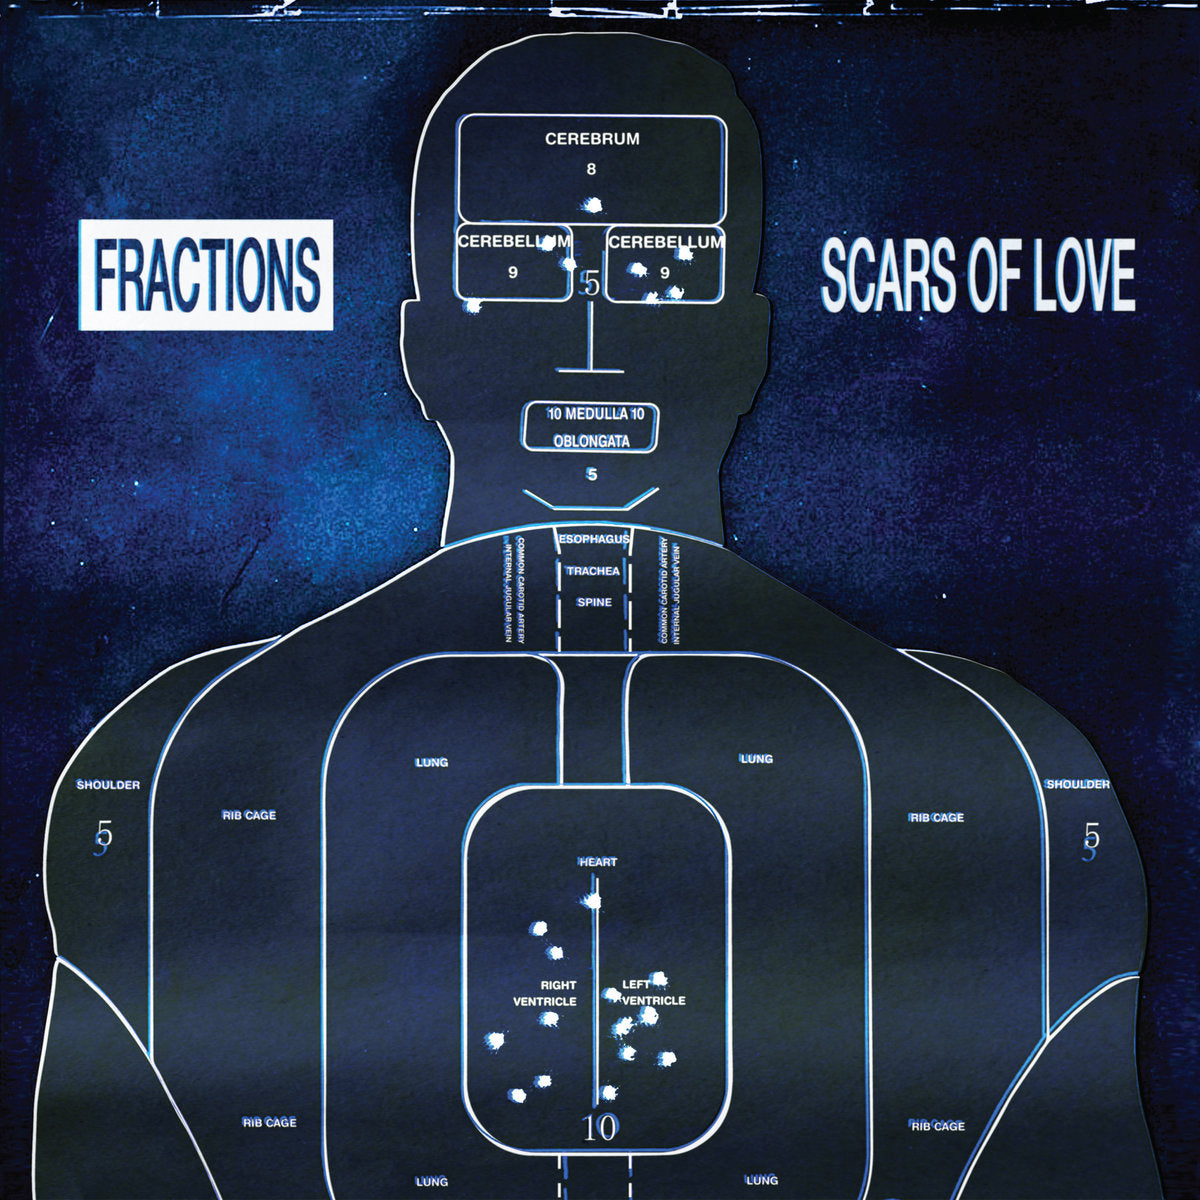 FRACTIONS - "SCARS OF LOVE" 12"